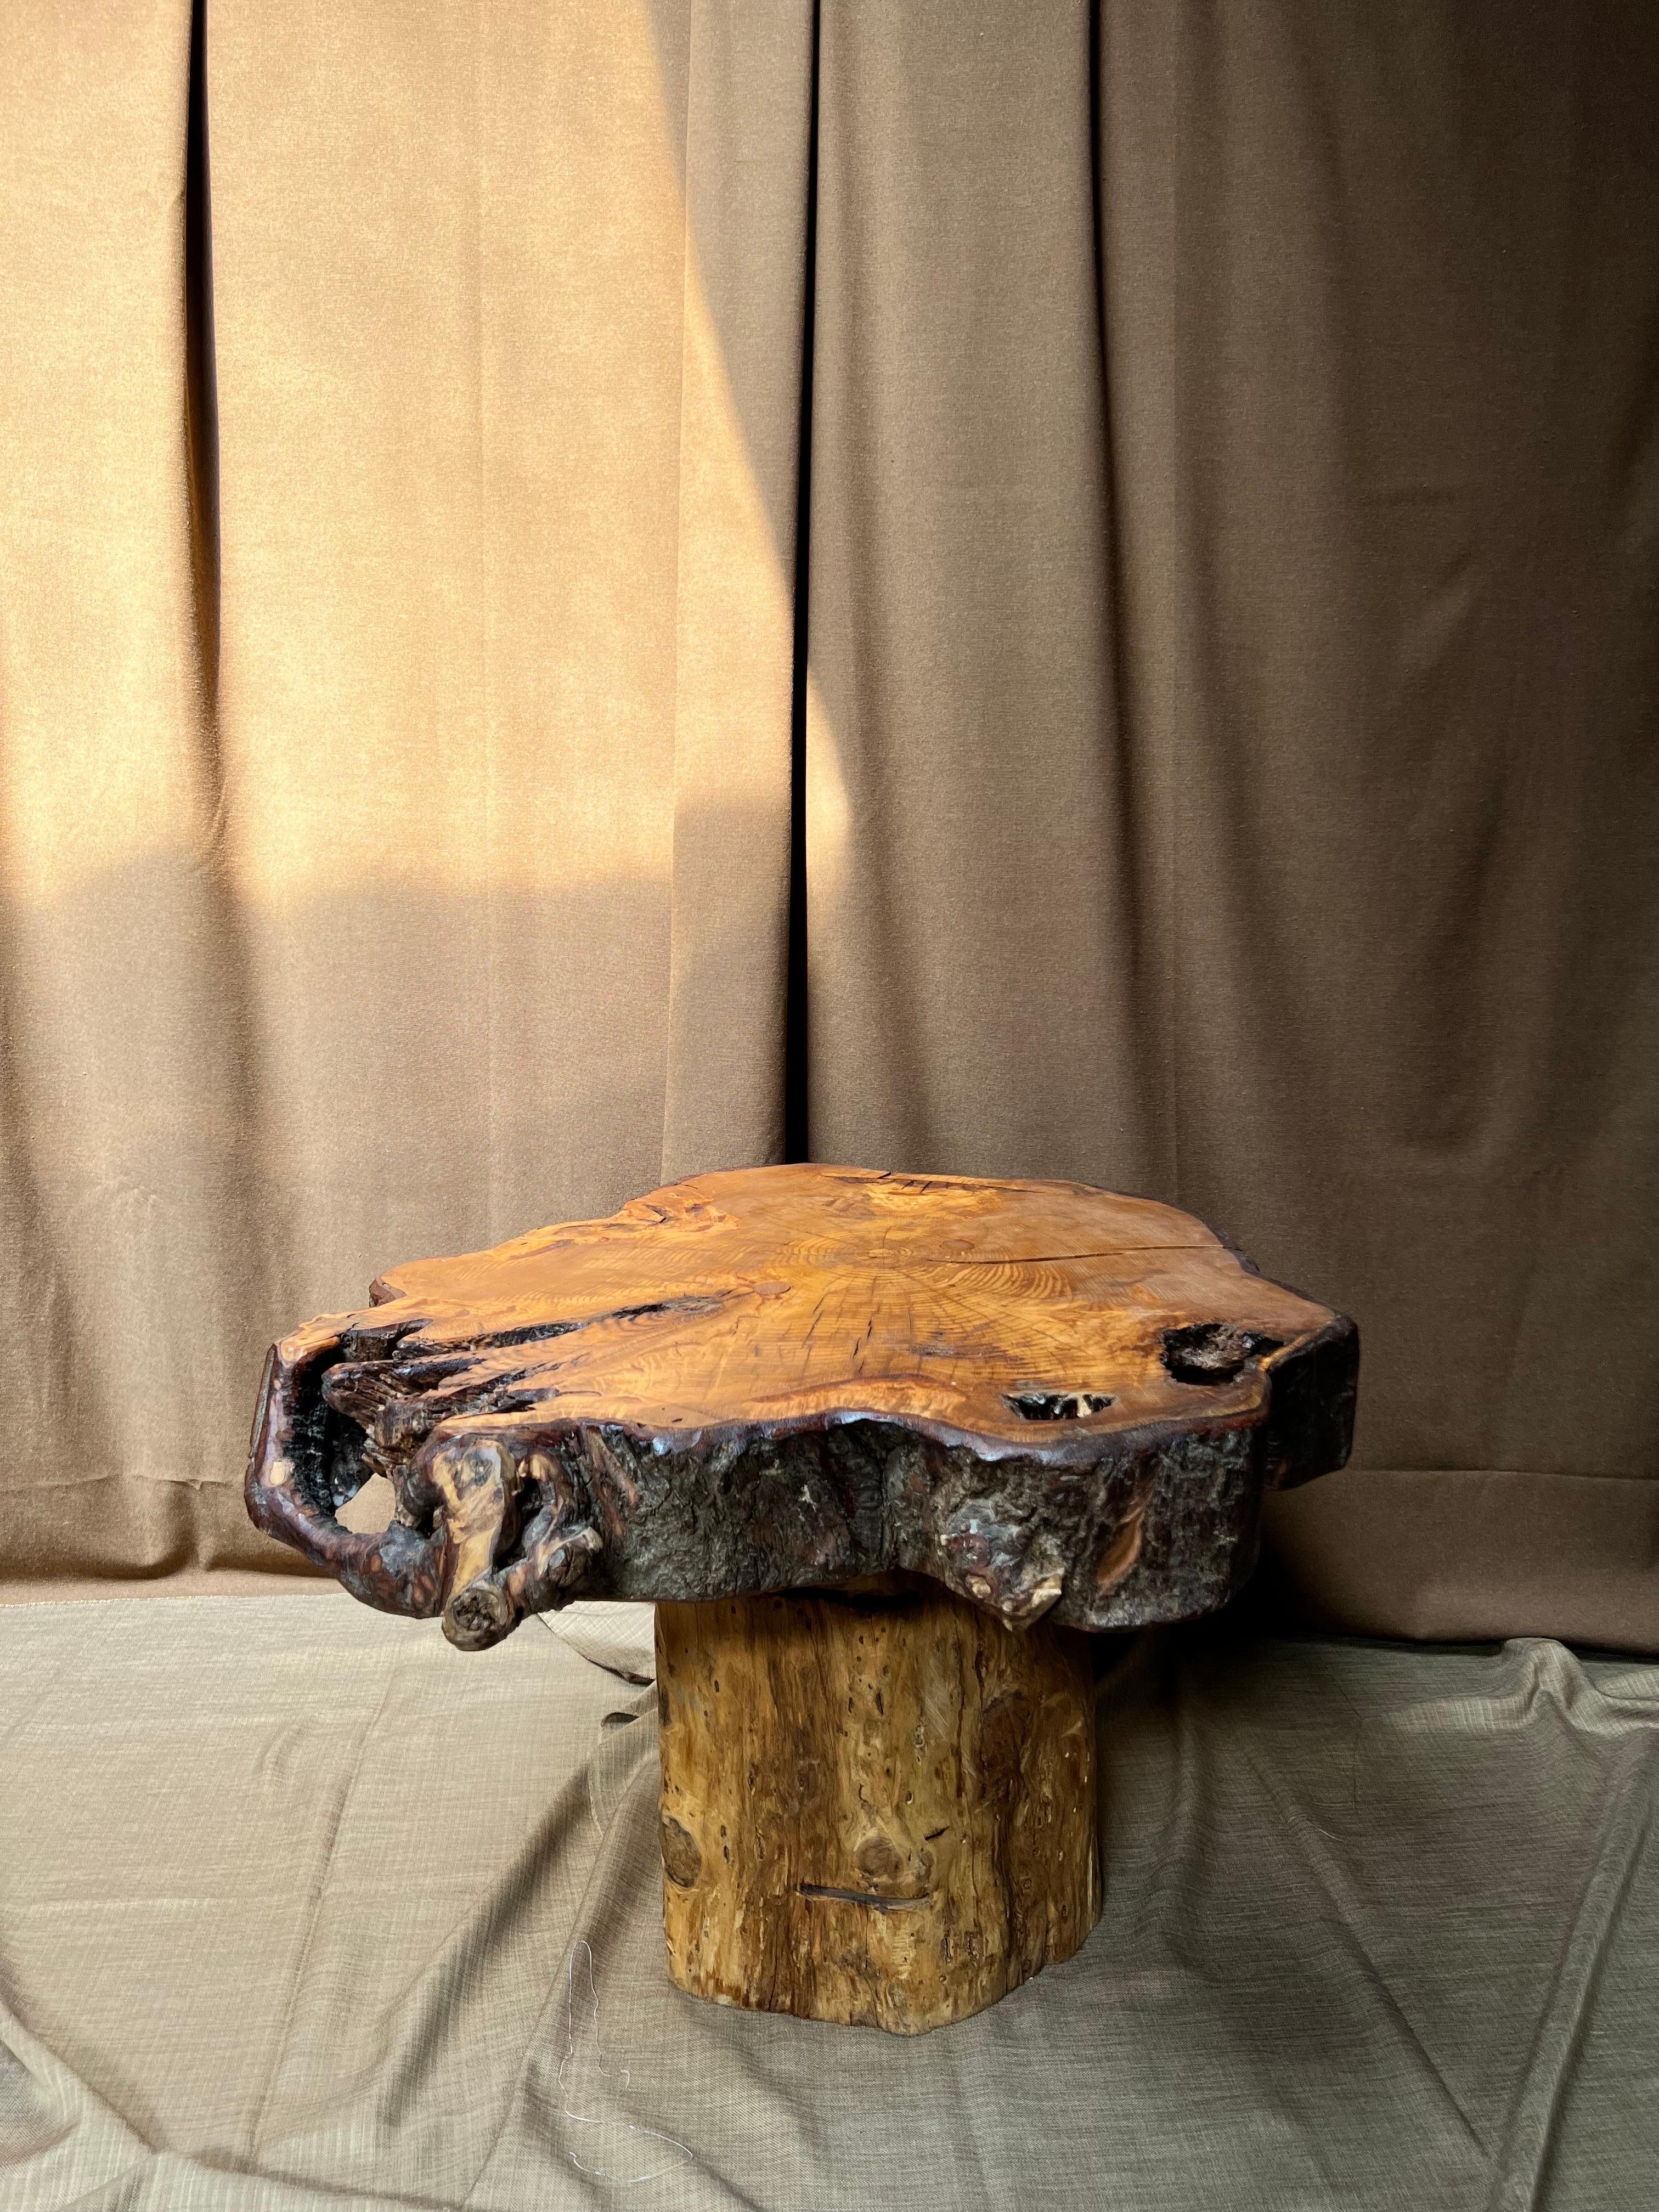 Very unique handmade with a tree trunk and a massive slay of tree. The joinery is two cylinder with provide a nice effect. The top is patinated and shows various shades of brown/brownish colors. Elegant and brutalist describe that table properly.